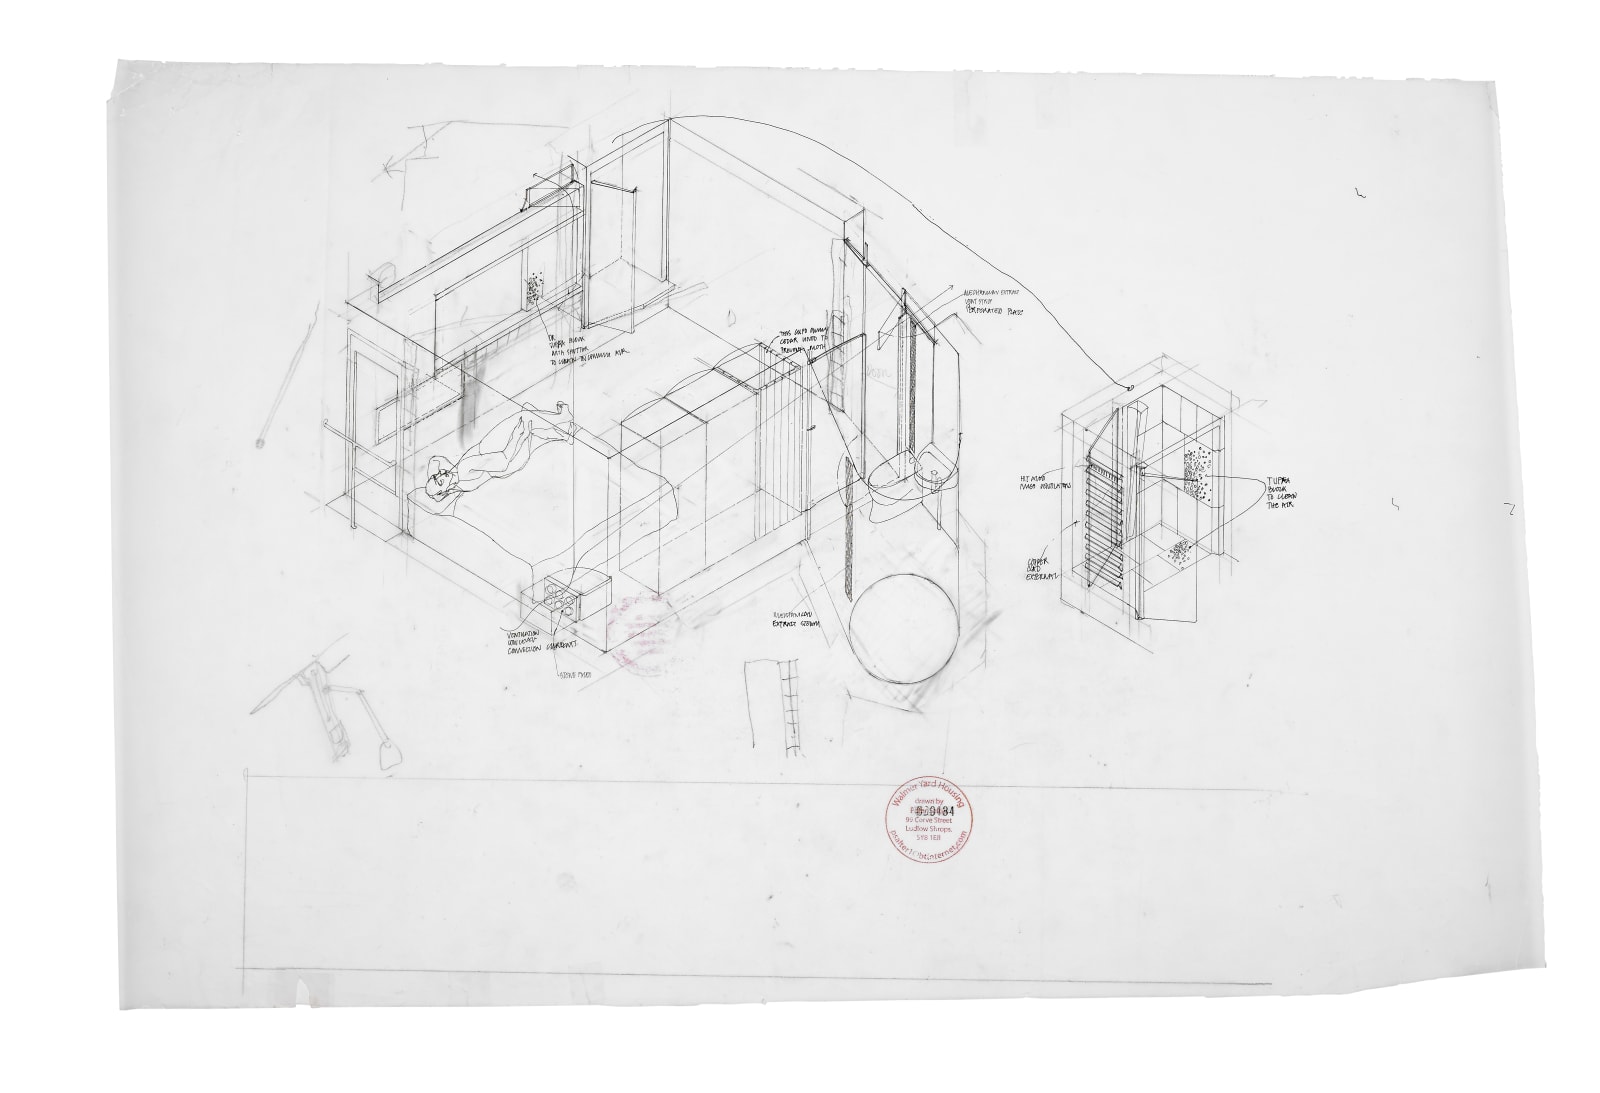 Peter Salter, Preliminary axonometric of House 3 second bedroom (1:20), 2008